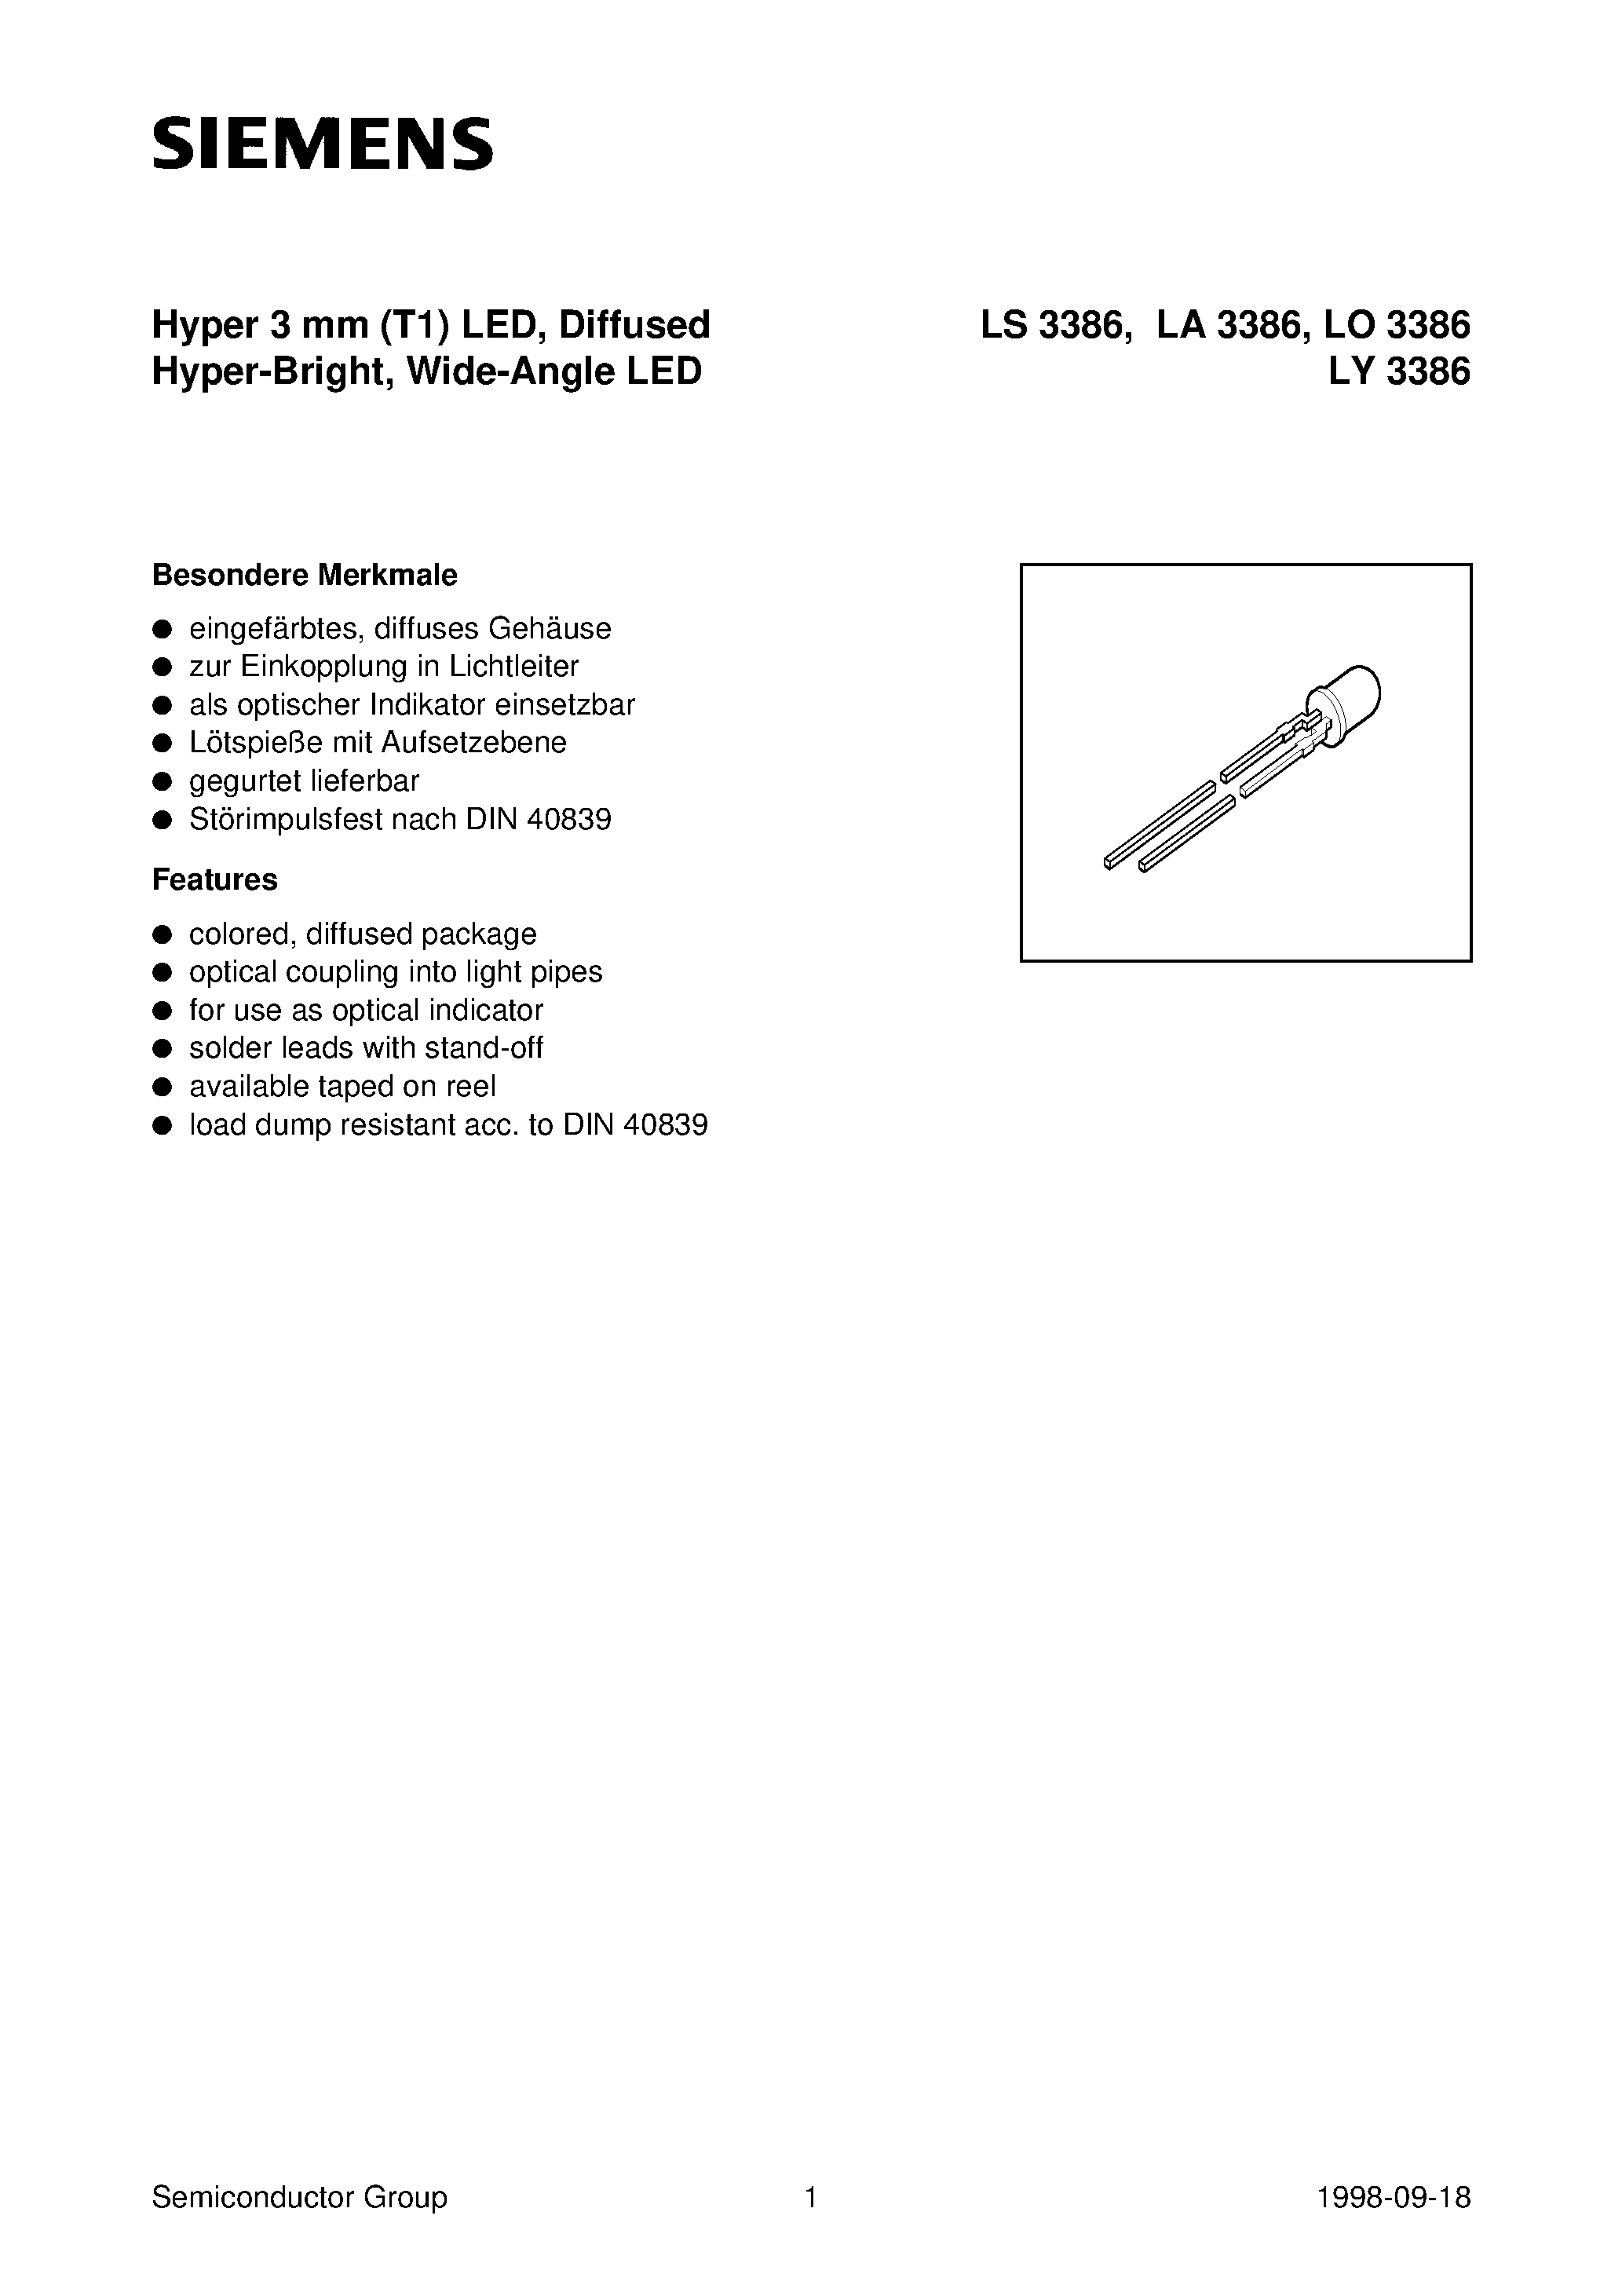 Datasheet LS3386-N - Hyper 3 mm T1 LED / Diffused Hyper-Bright / Wide-Angle LED page 1